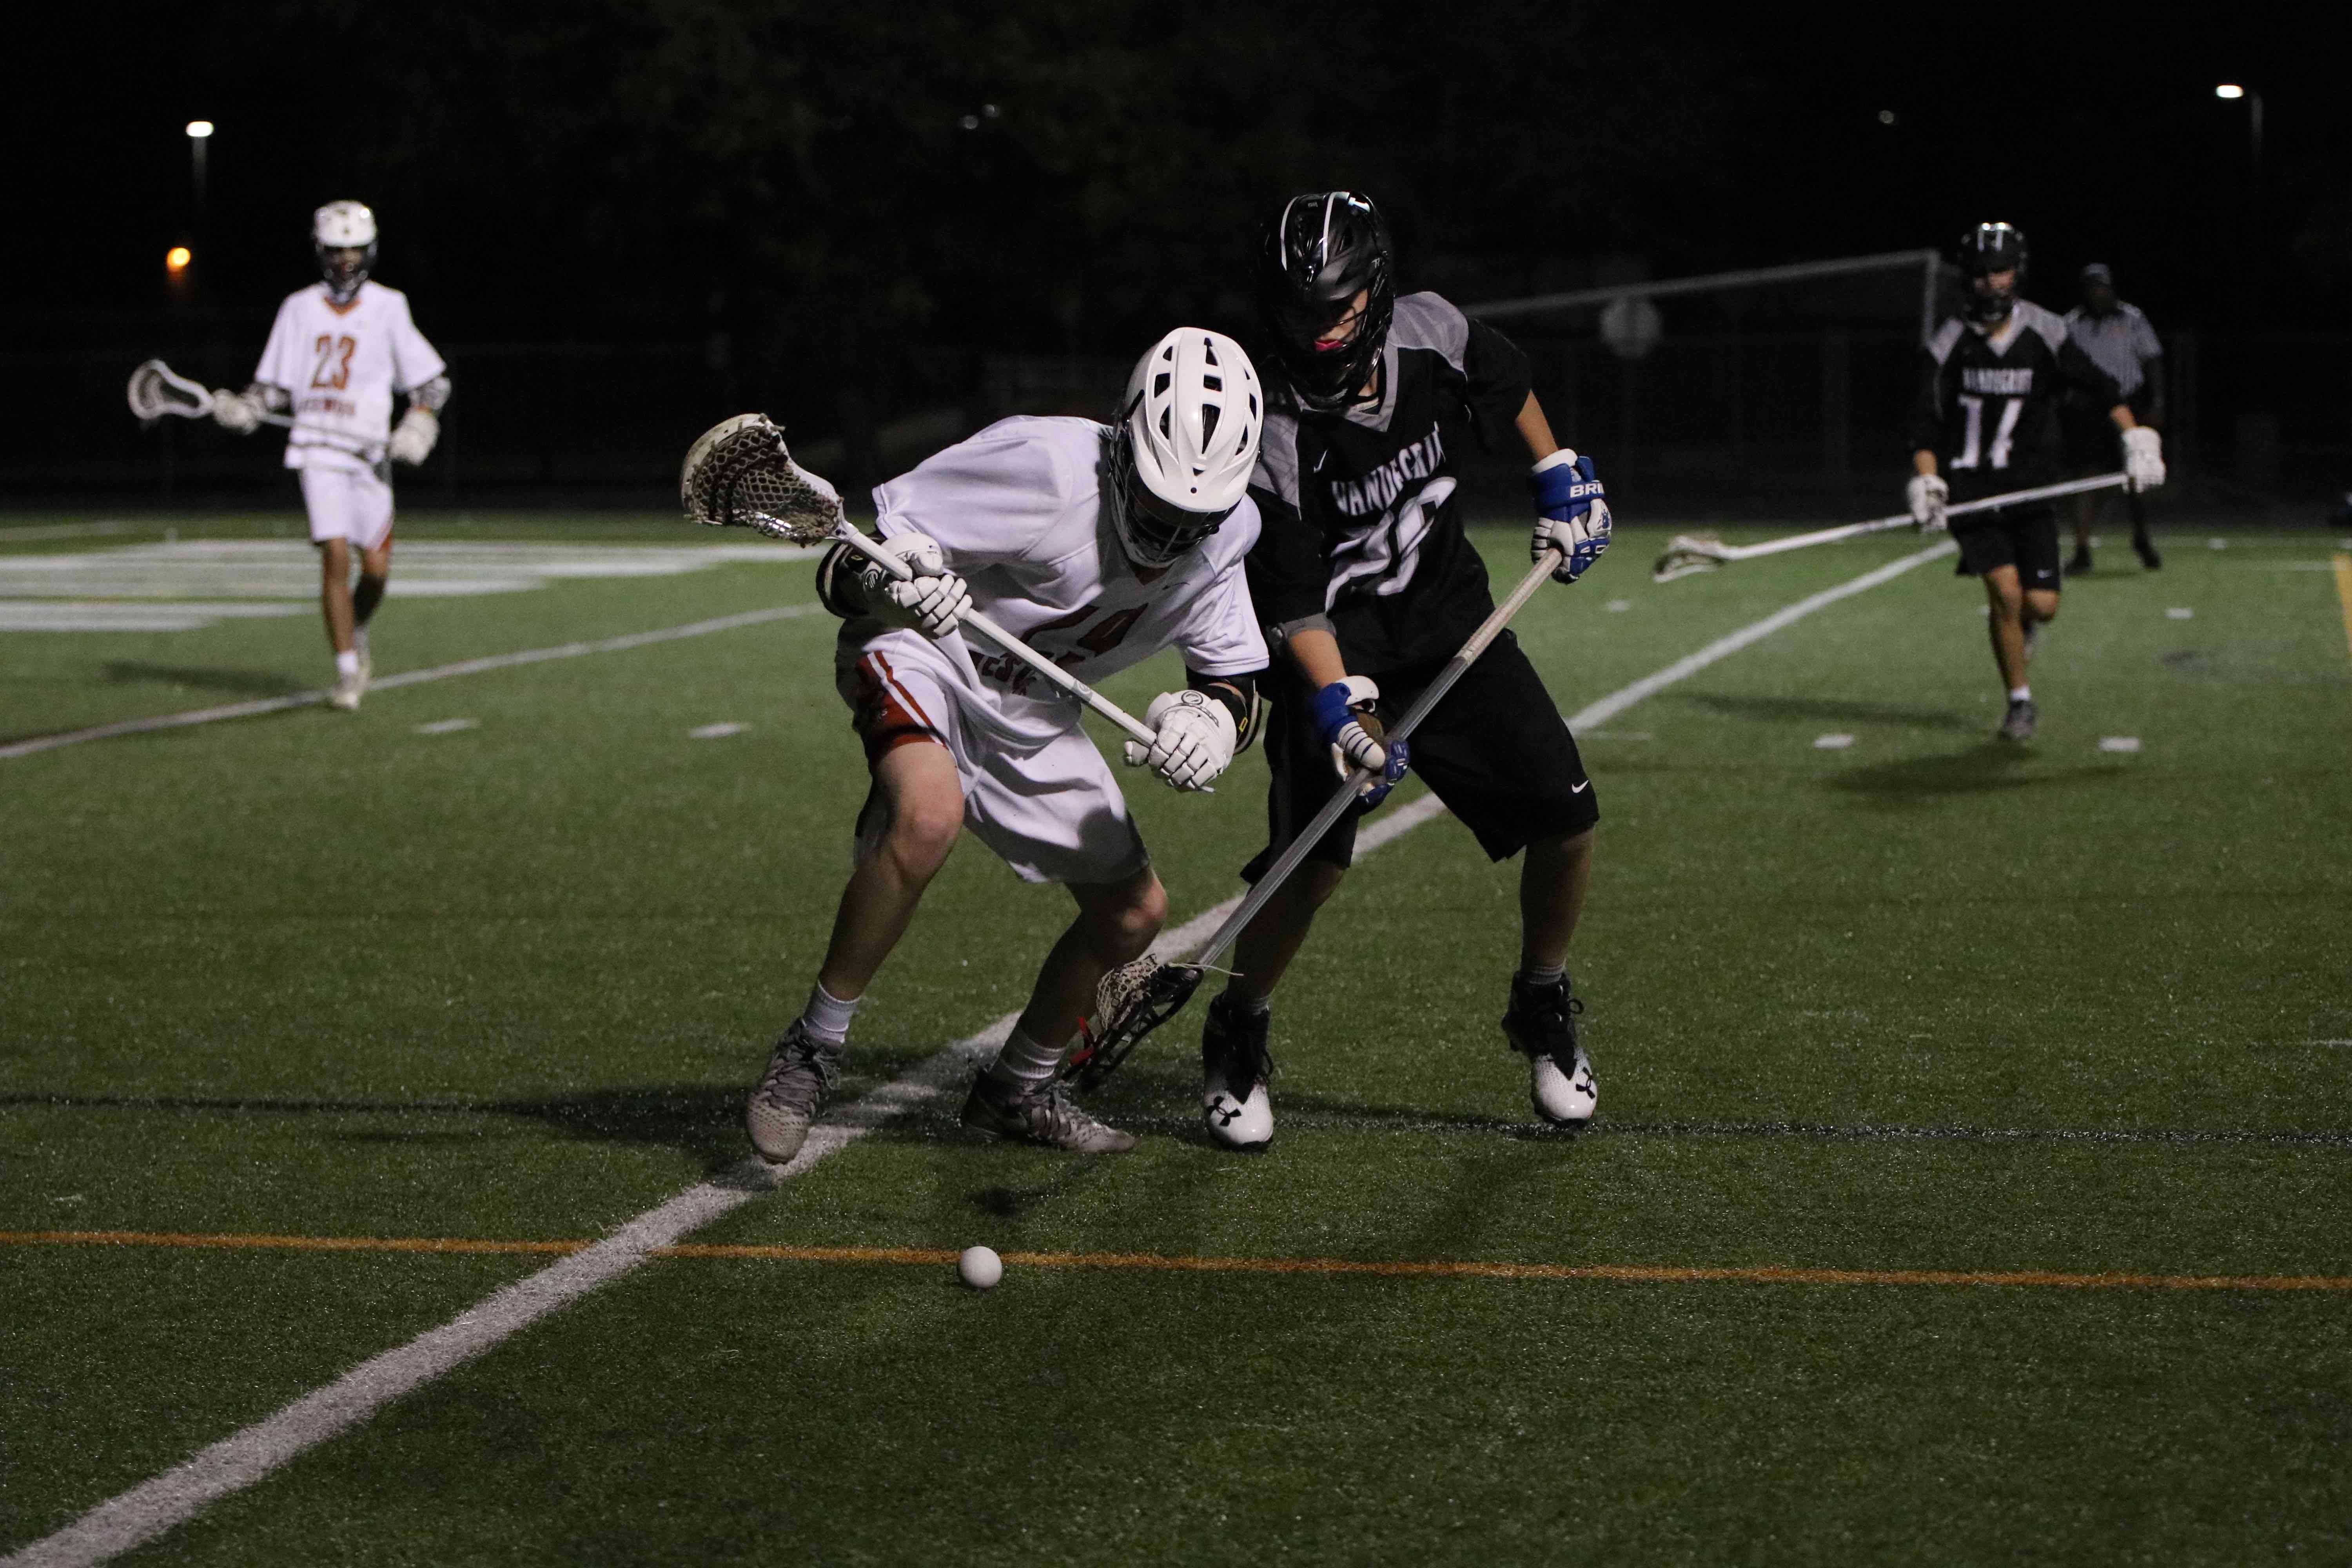 GALLERY%3A+JV+Boys+Lacrosse+Suffers+Against+Vandegrift+Vipers+3-11